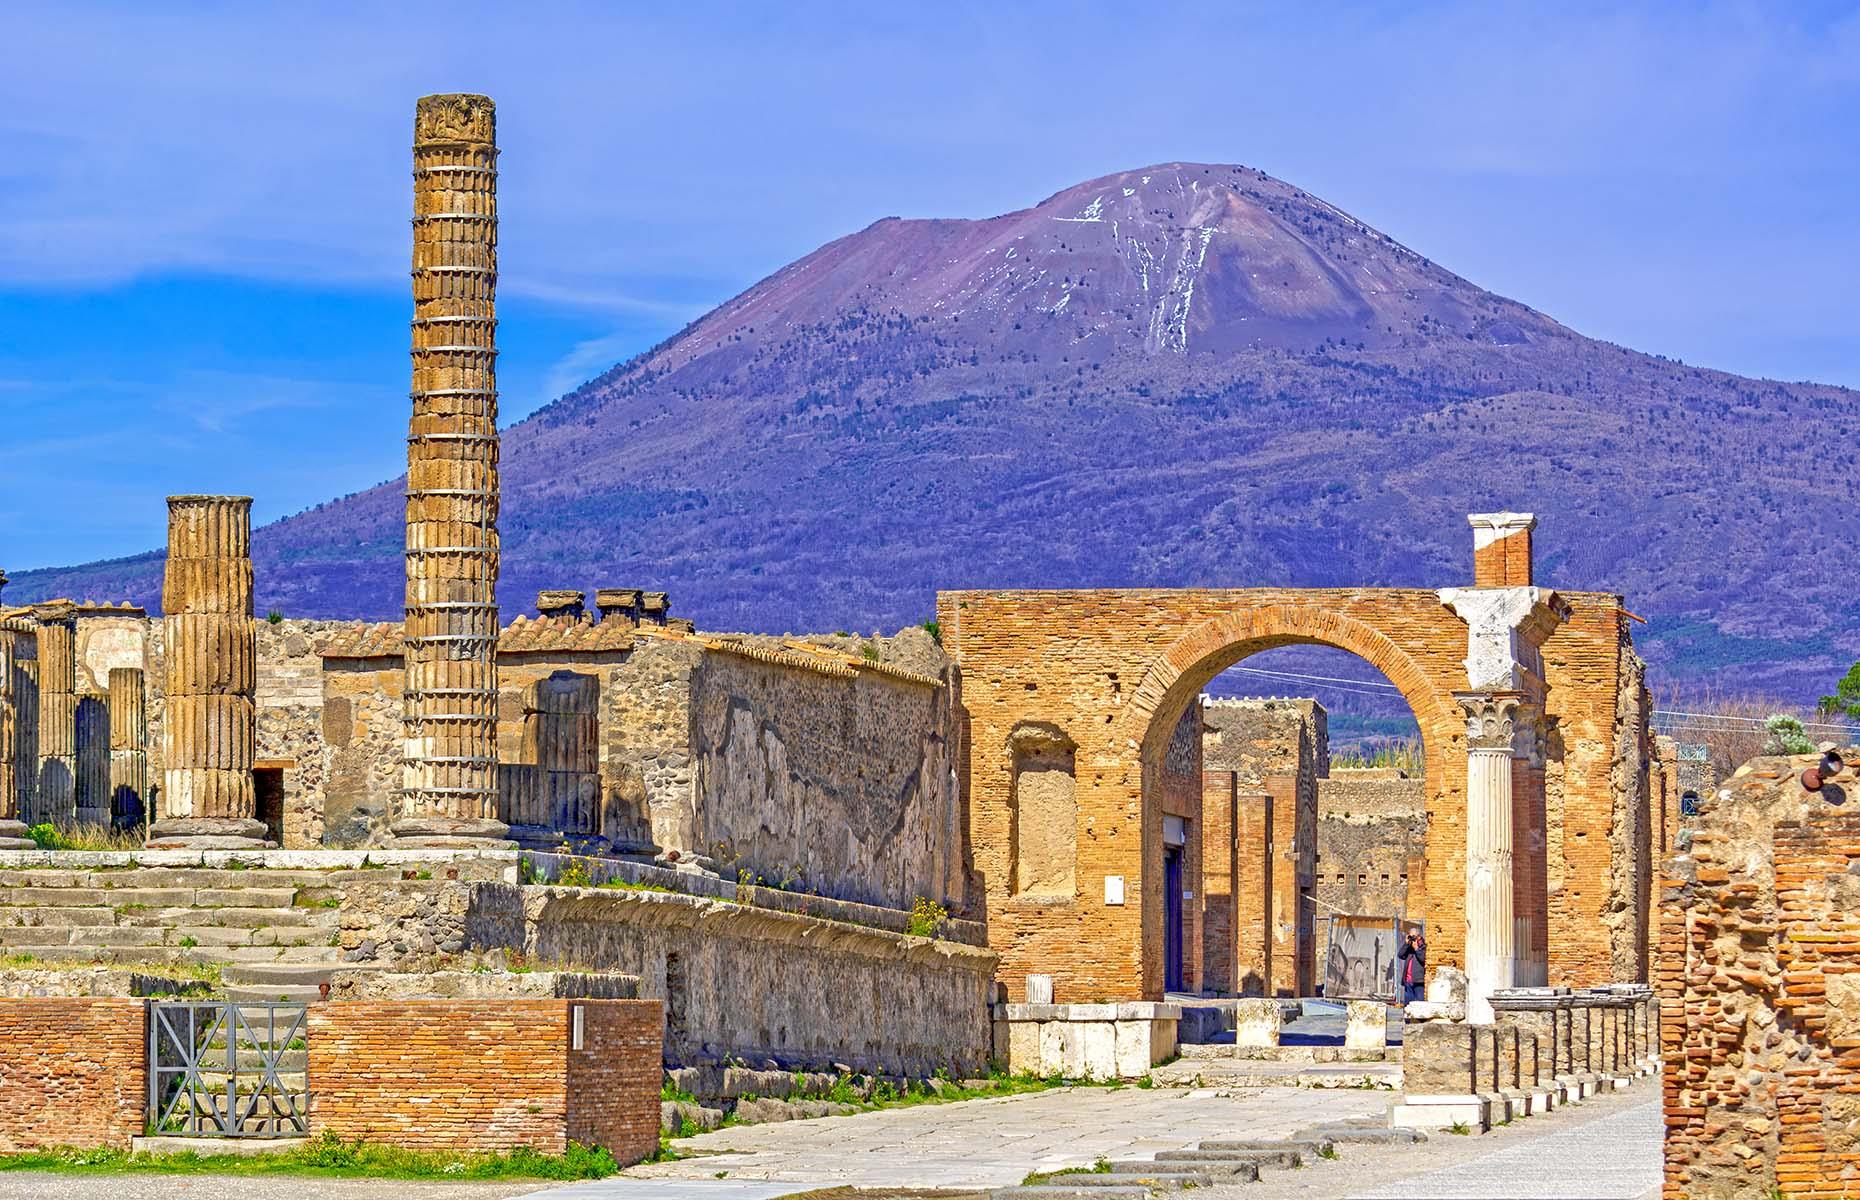 <p>As people were sitting down to lunch, a light dusting of ash began to drift over Pompeii, followed by heavier downfalls of white pumice stone and debris raining over the town, driven south from the spewing cone of Mount Vesuvius. Some townspeople managed to flee – clinging to as many treasures, jewellery or coins as they could carry with them – while others sought shelter in basements as the roofs of houses began to collapse under the weight of the rocks.</p>